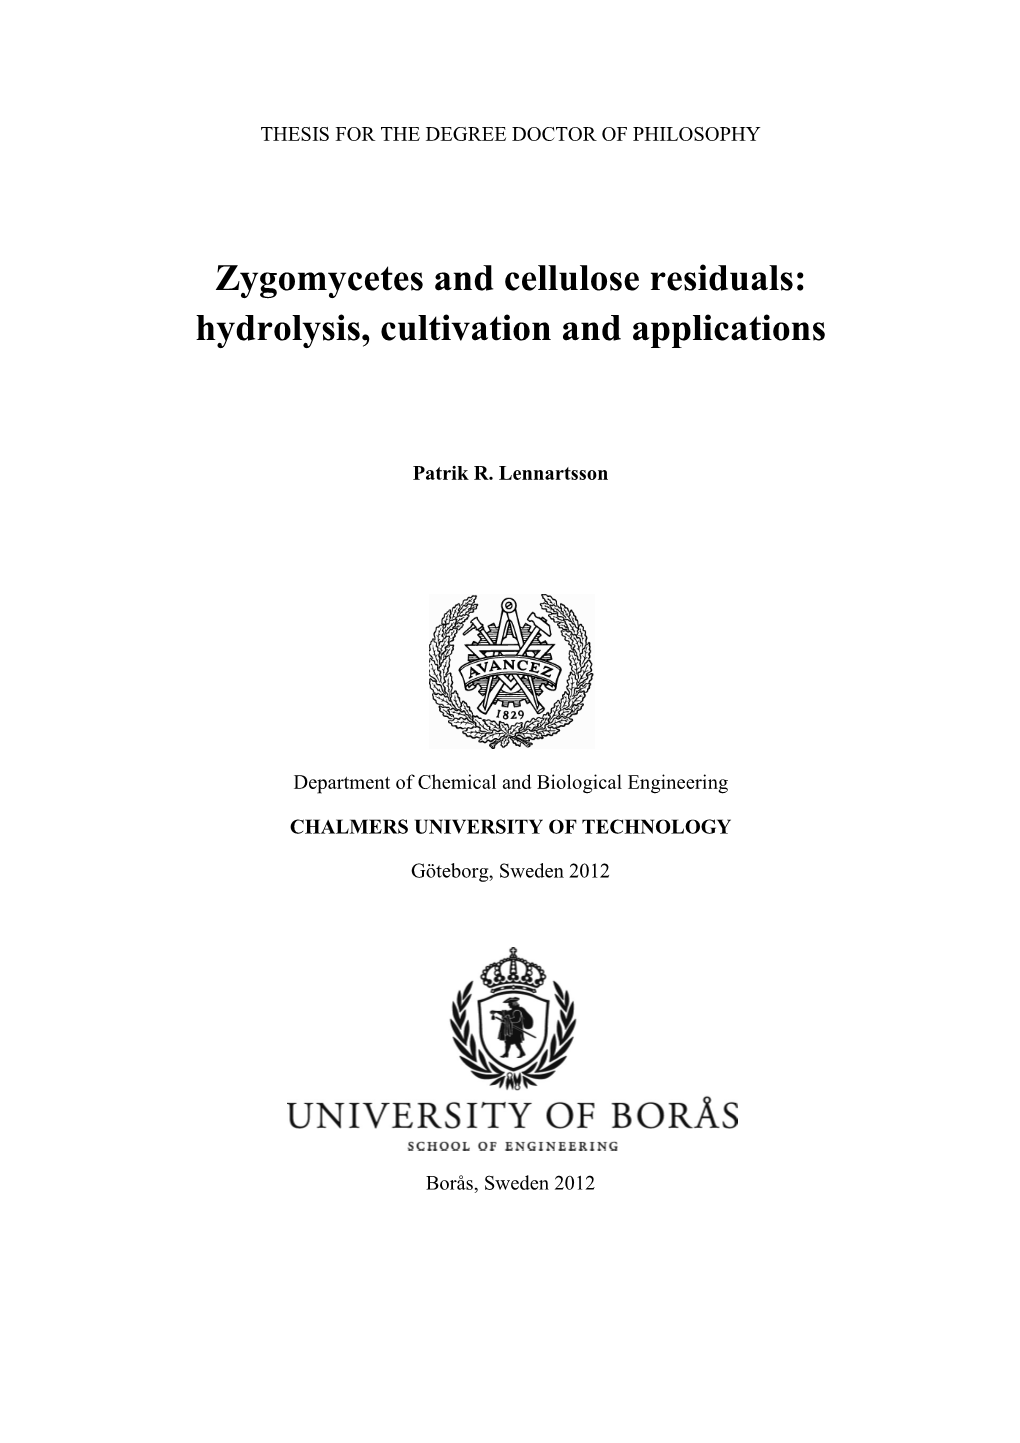 Zygomycetes and Cellulose Residuals: Hydrolysis, Cultivation and Applications